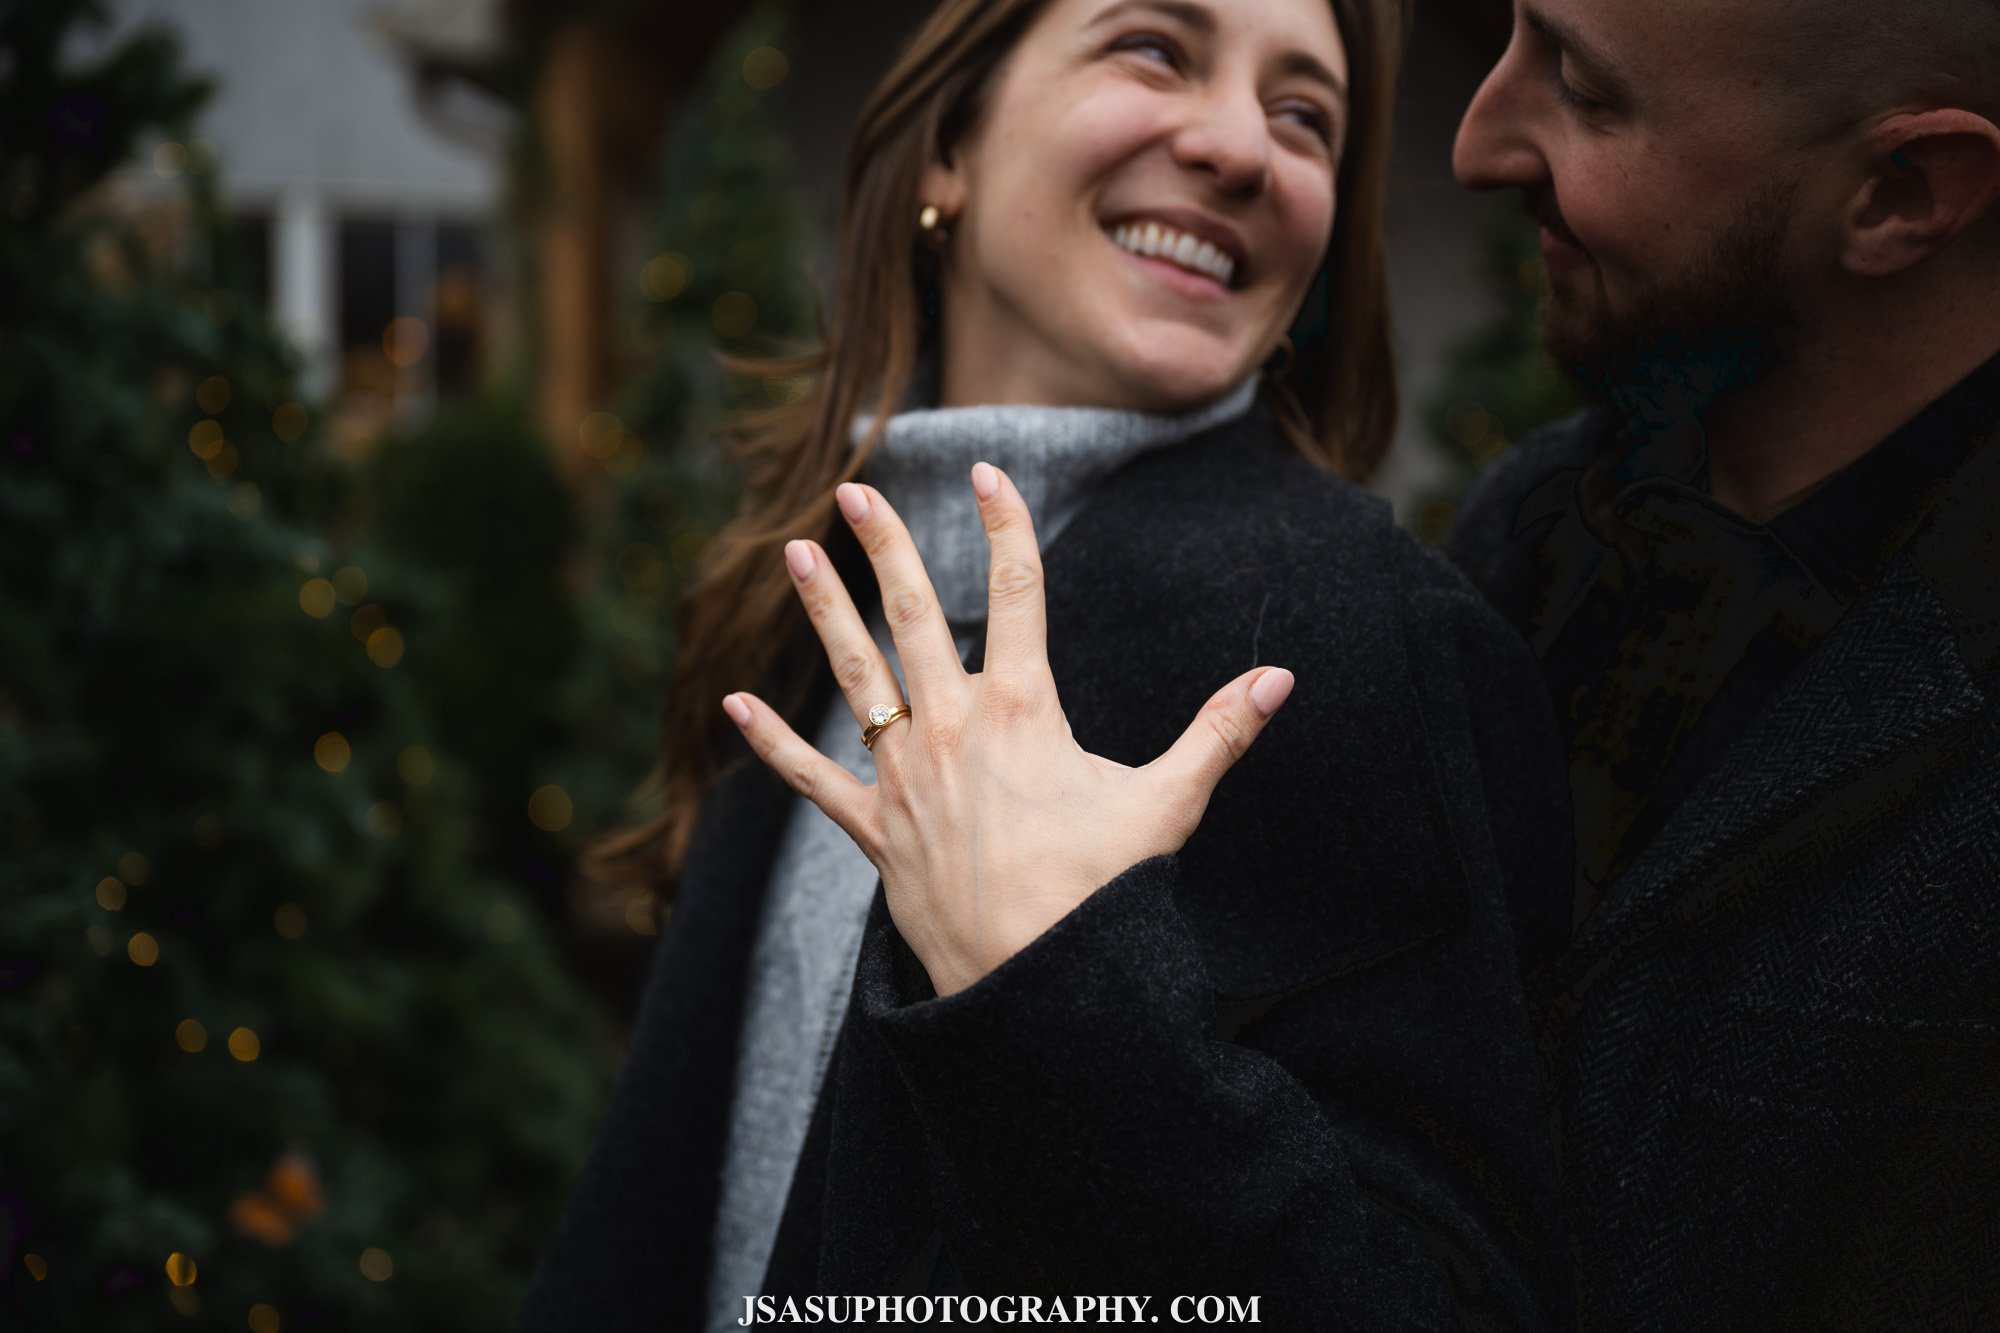 drew-alex-surprise-proposal-photos-old-westminister-winery-jsasuphotography-11.jpg